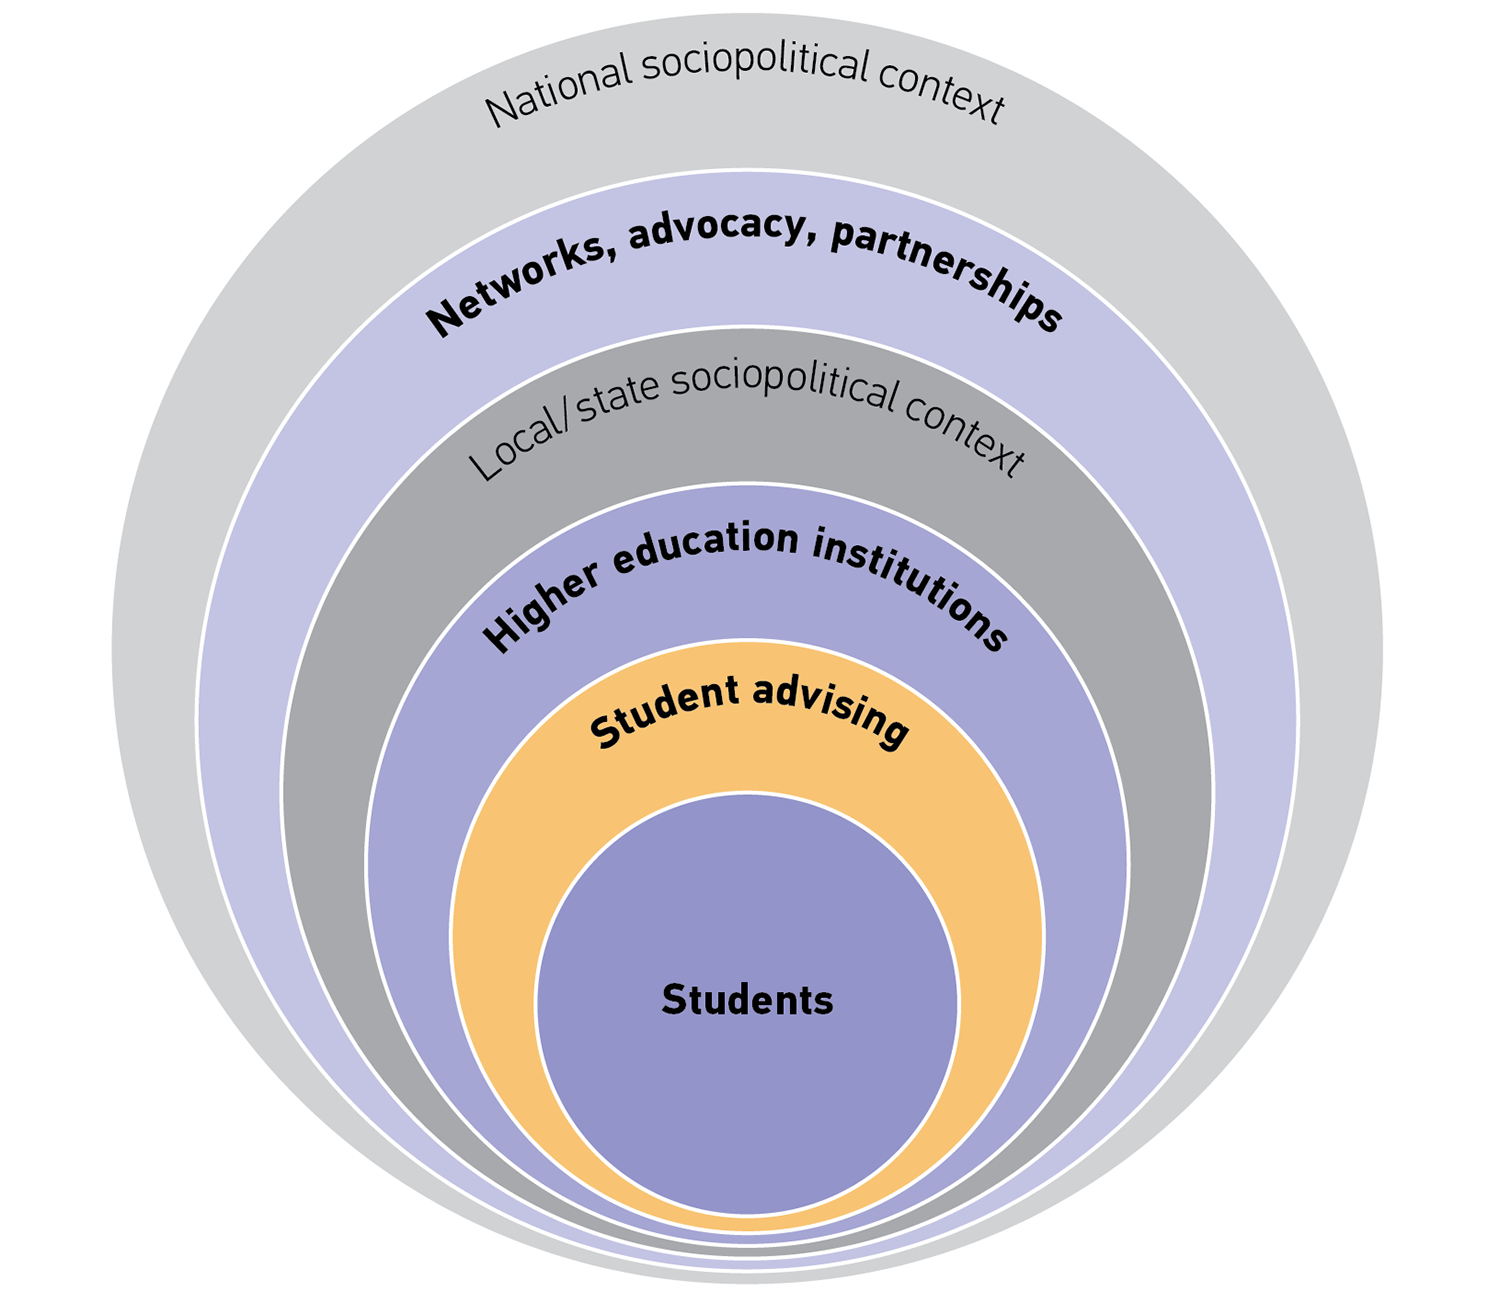 Nested circles from innermost to outermost: Students; Student advising; Higher education institutions; Local/state sociopolitical context; Networks, advocacy, partnerships; National sociopolitical context.